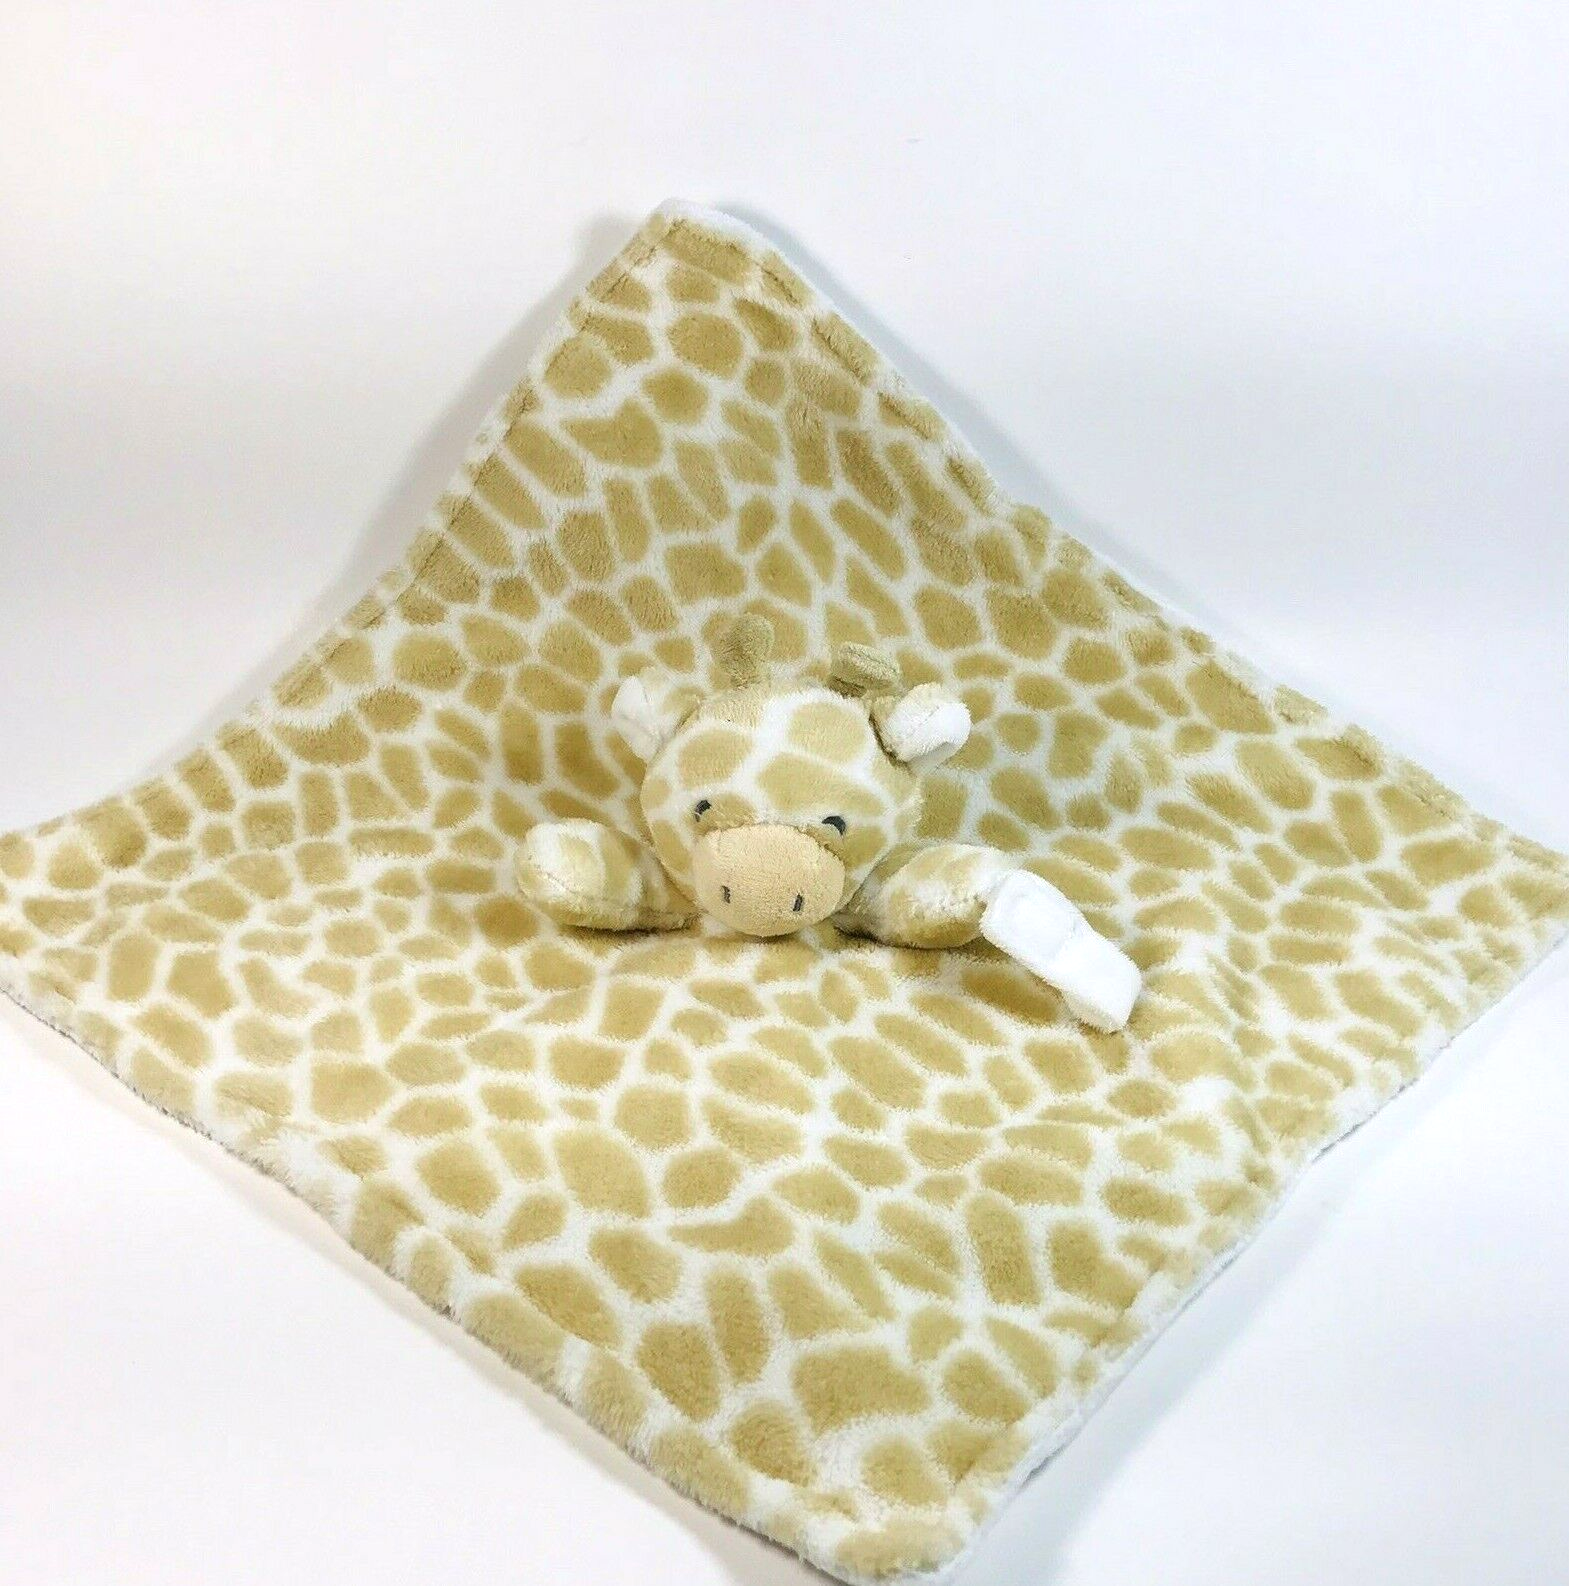 Carter's Baby Lovey Giraffe Pacifier Holder Security Blanket Plush Soother 2016 - $9.99